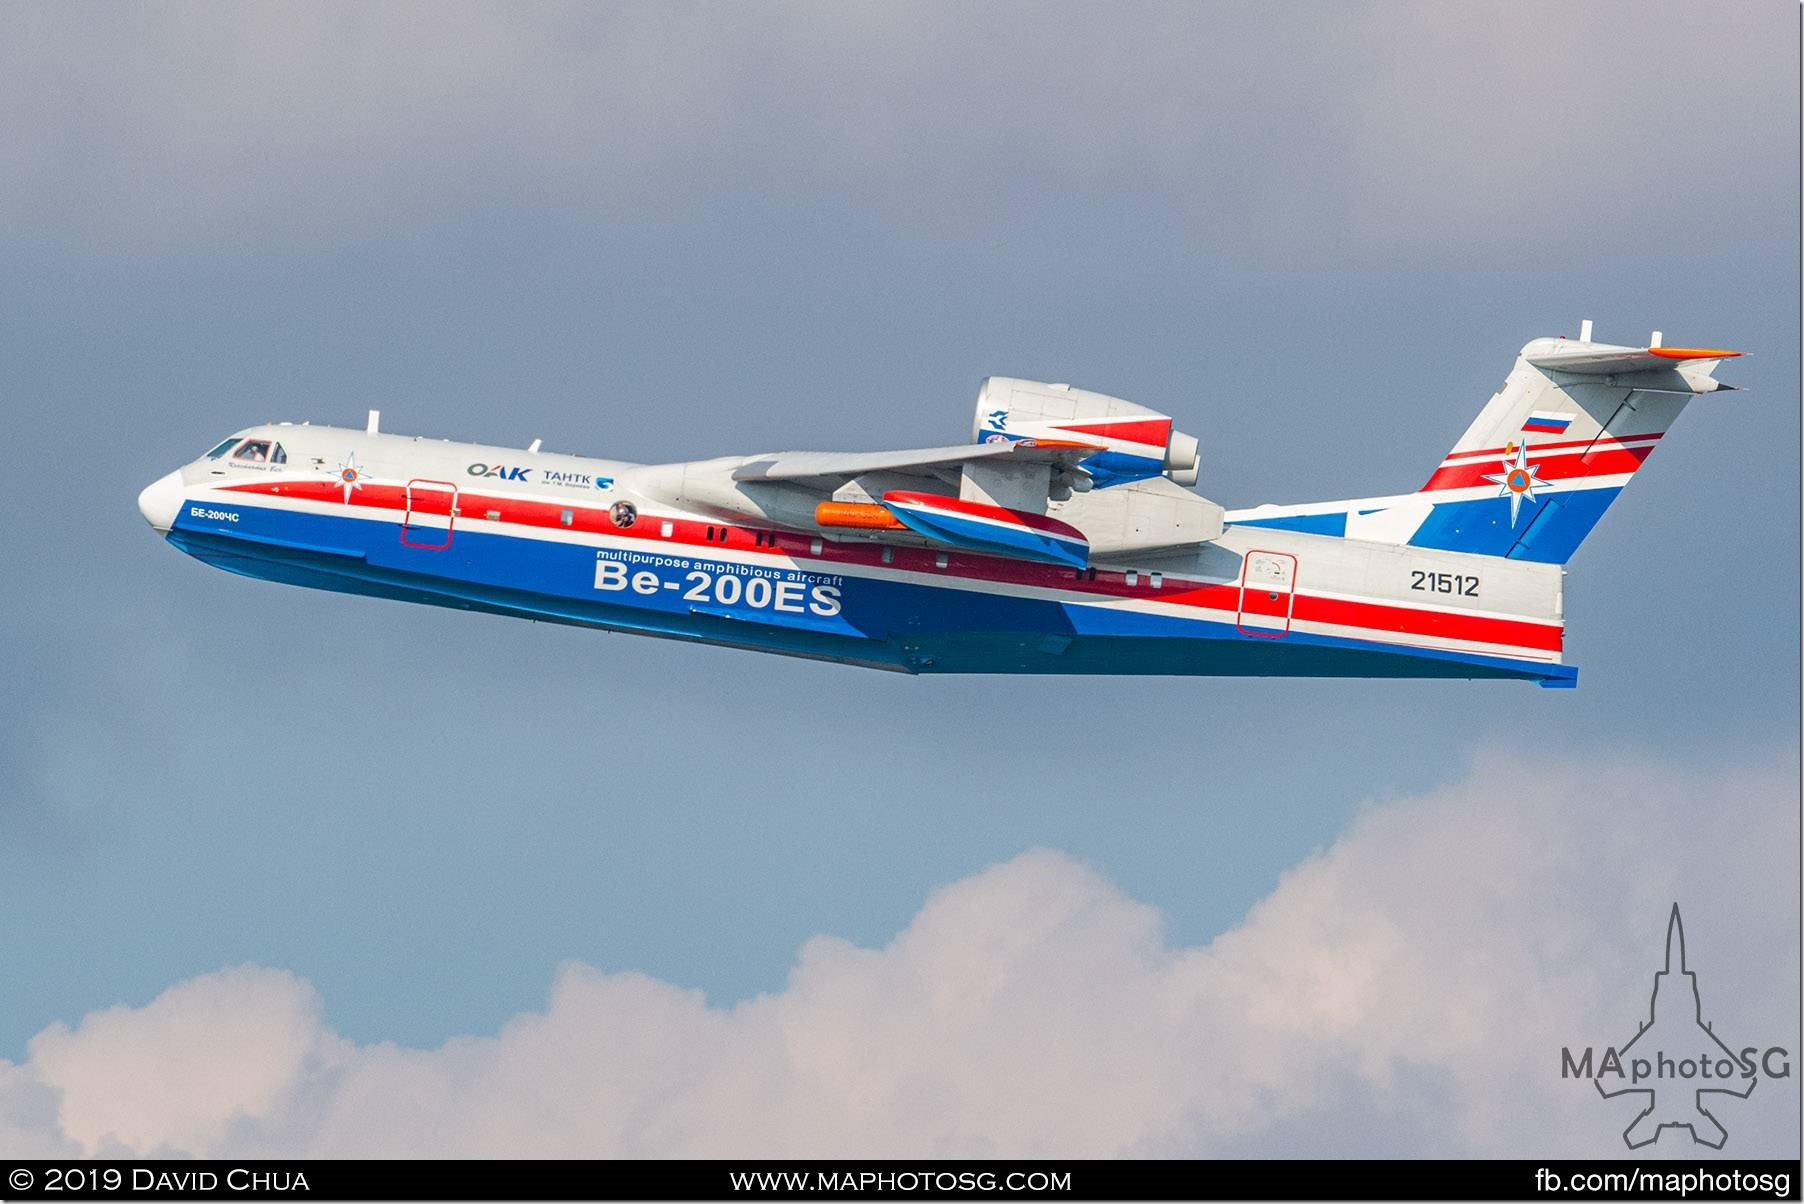 Beriev Be-200 Altair Fire fighting aircraft